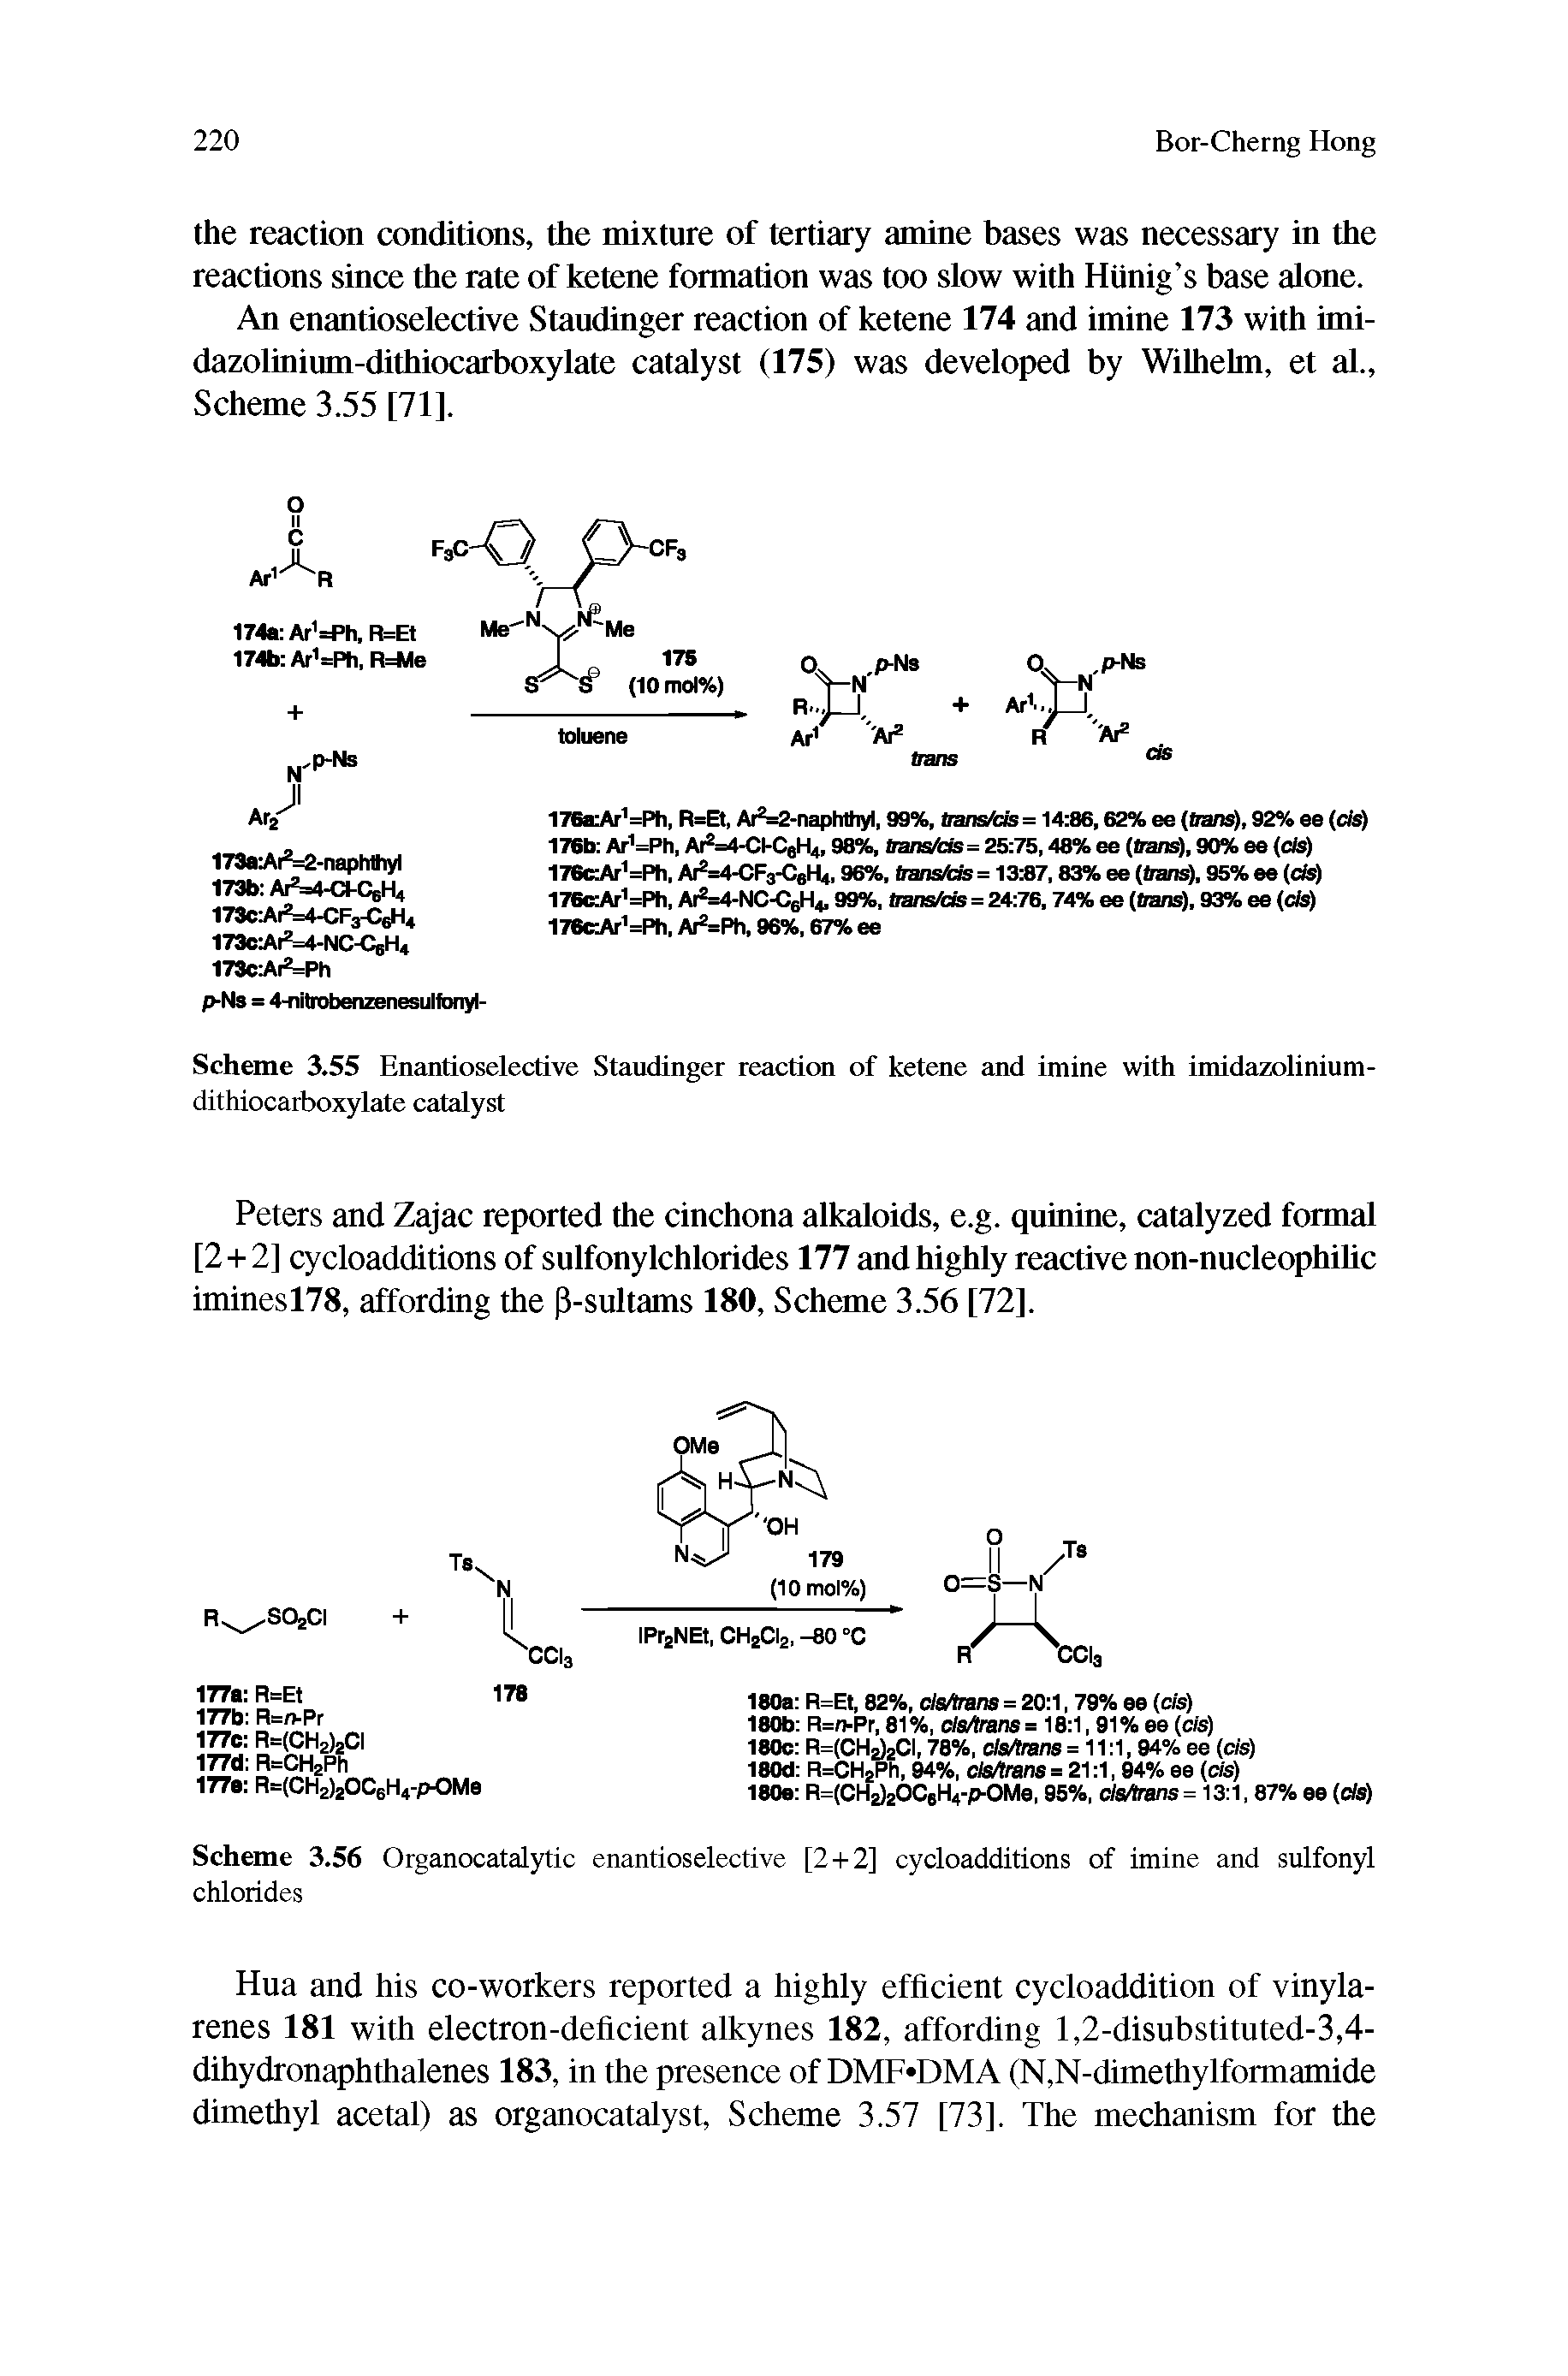 Scheme 3.55 Enantioselective Staudinger reaction of ketene and imine with imidazolinium-dithiocarboxylate catalyst...